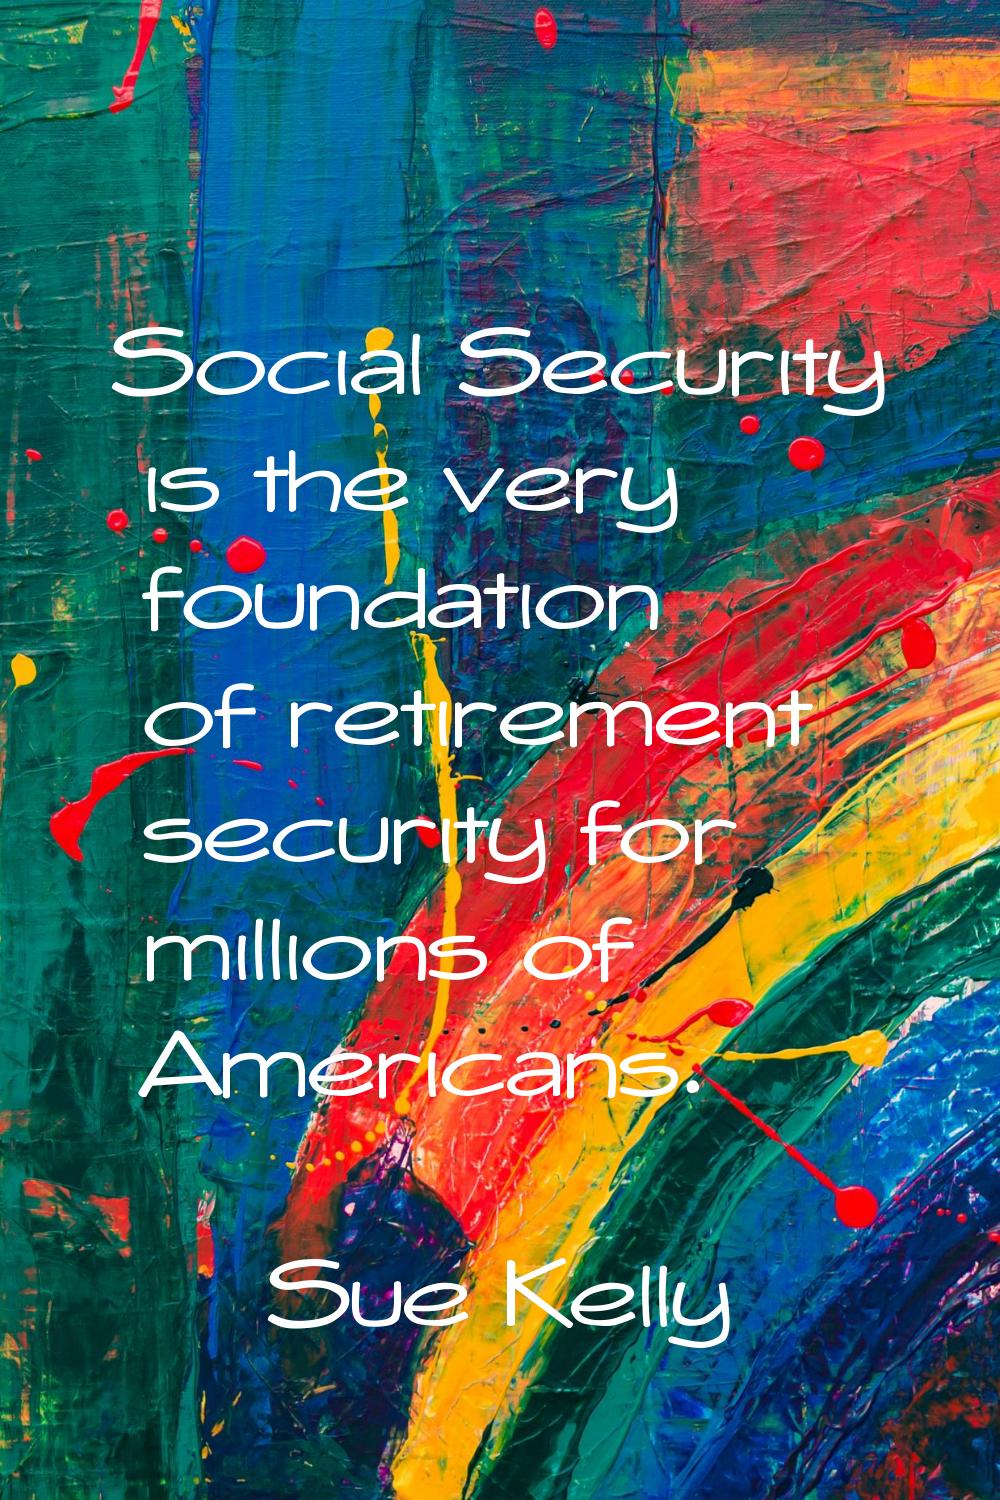 Social Security is the very foundation of retirement security for millions of Americans.